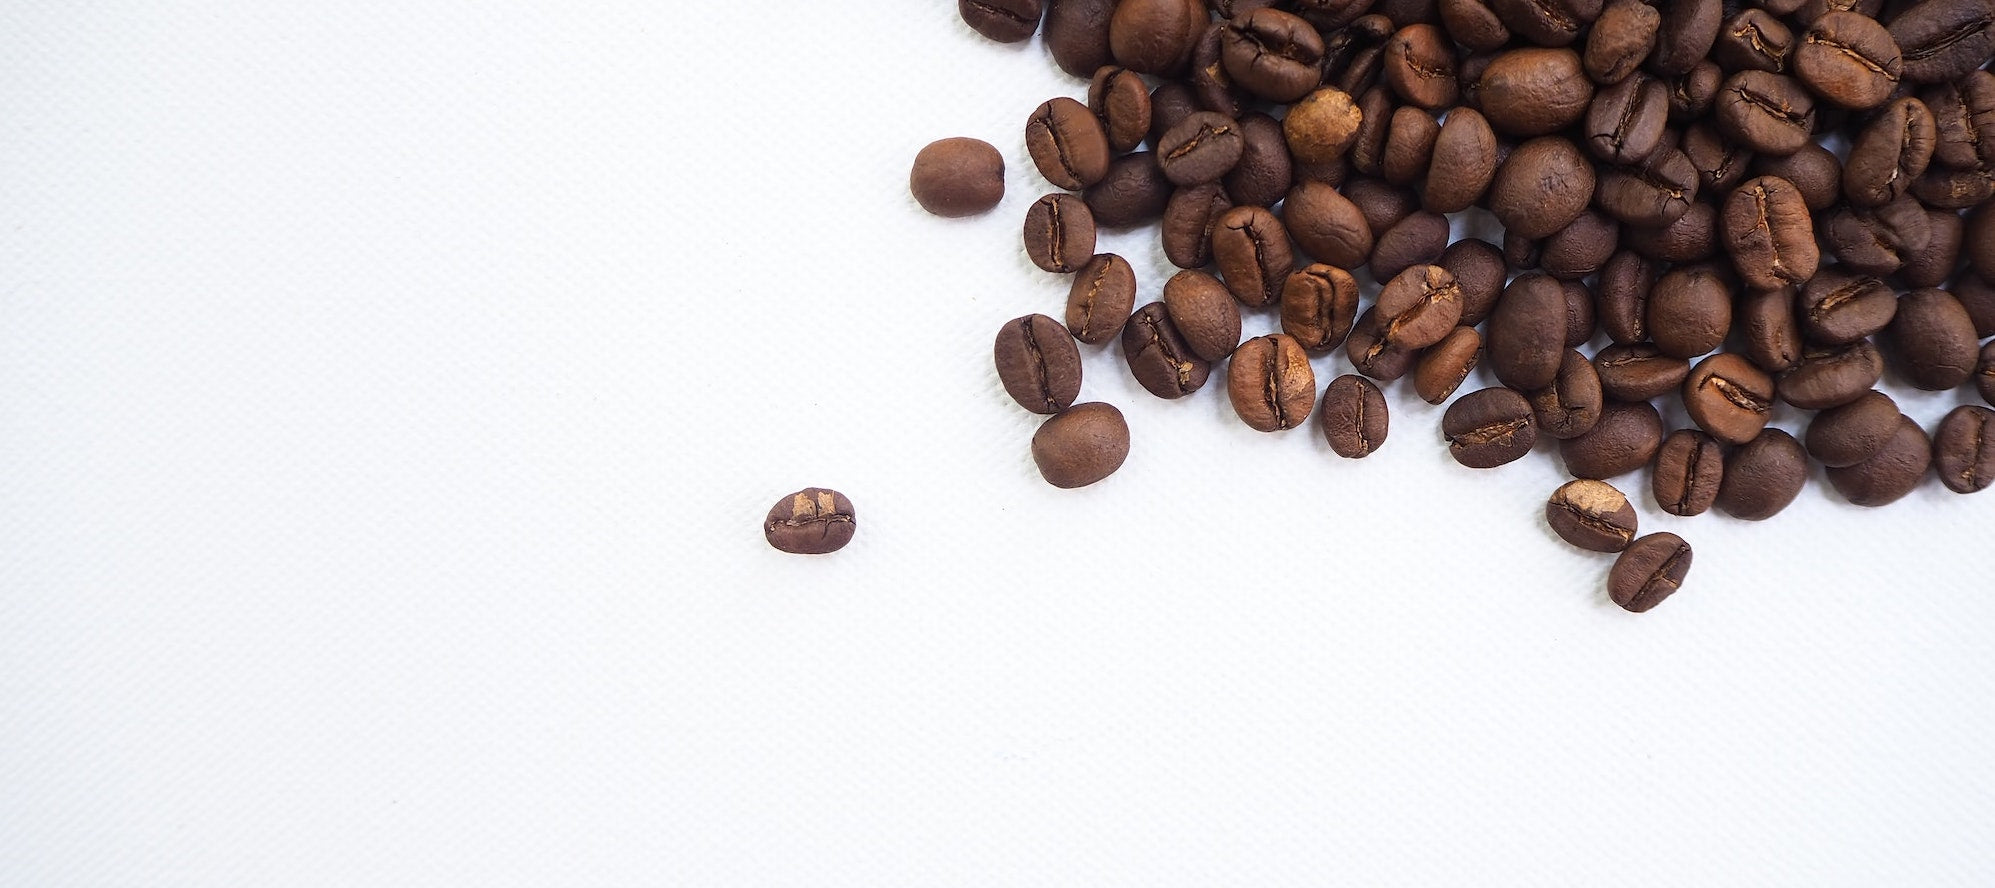 Benefits of Caffeine For Your Skin